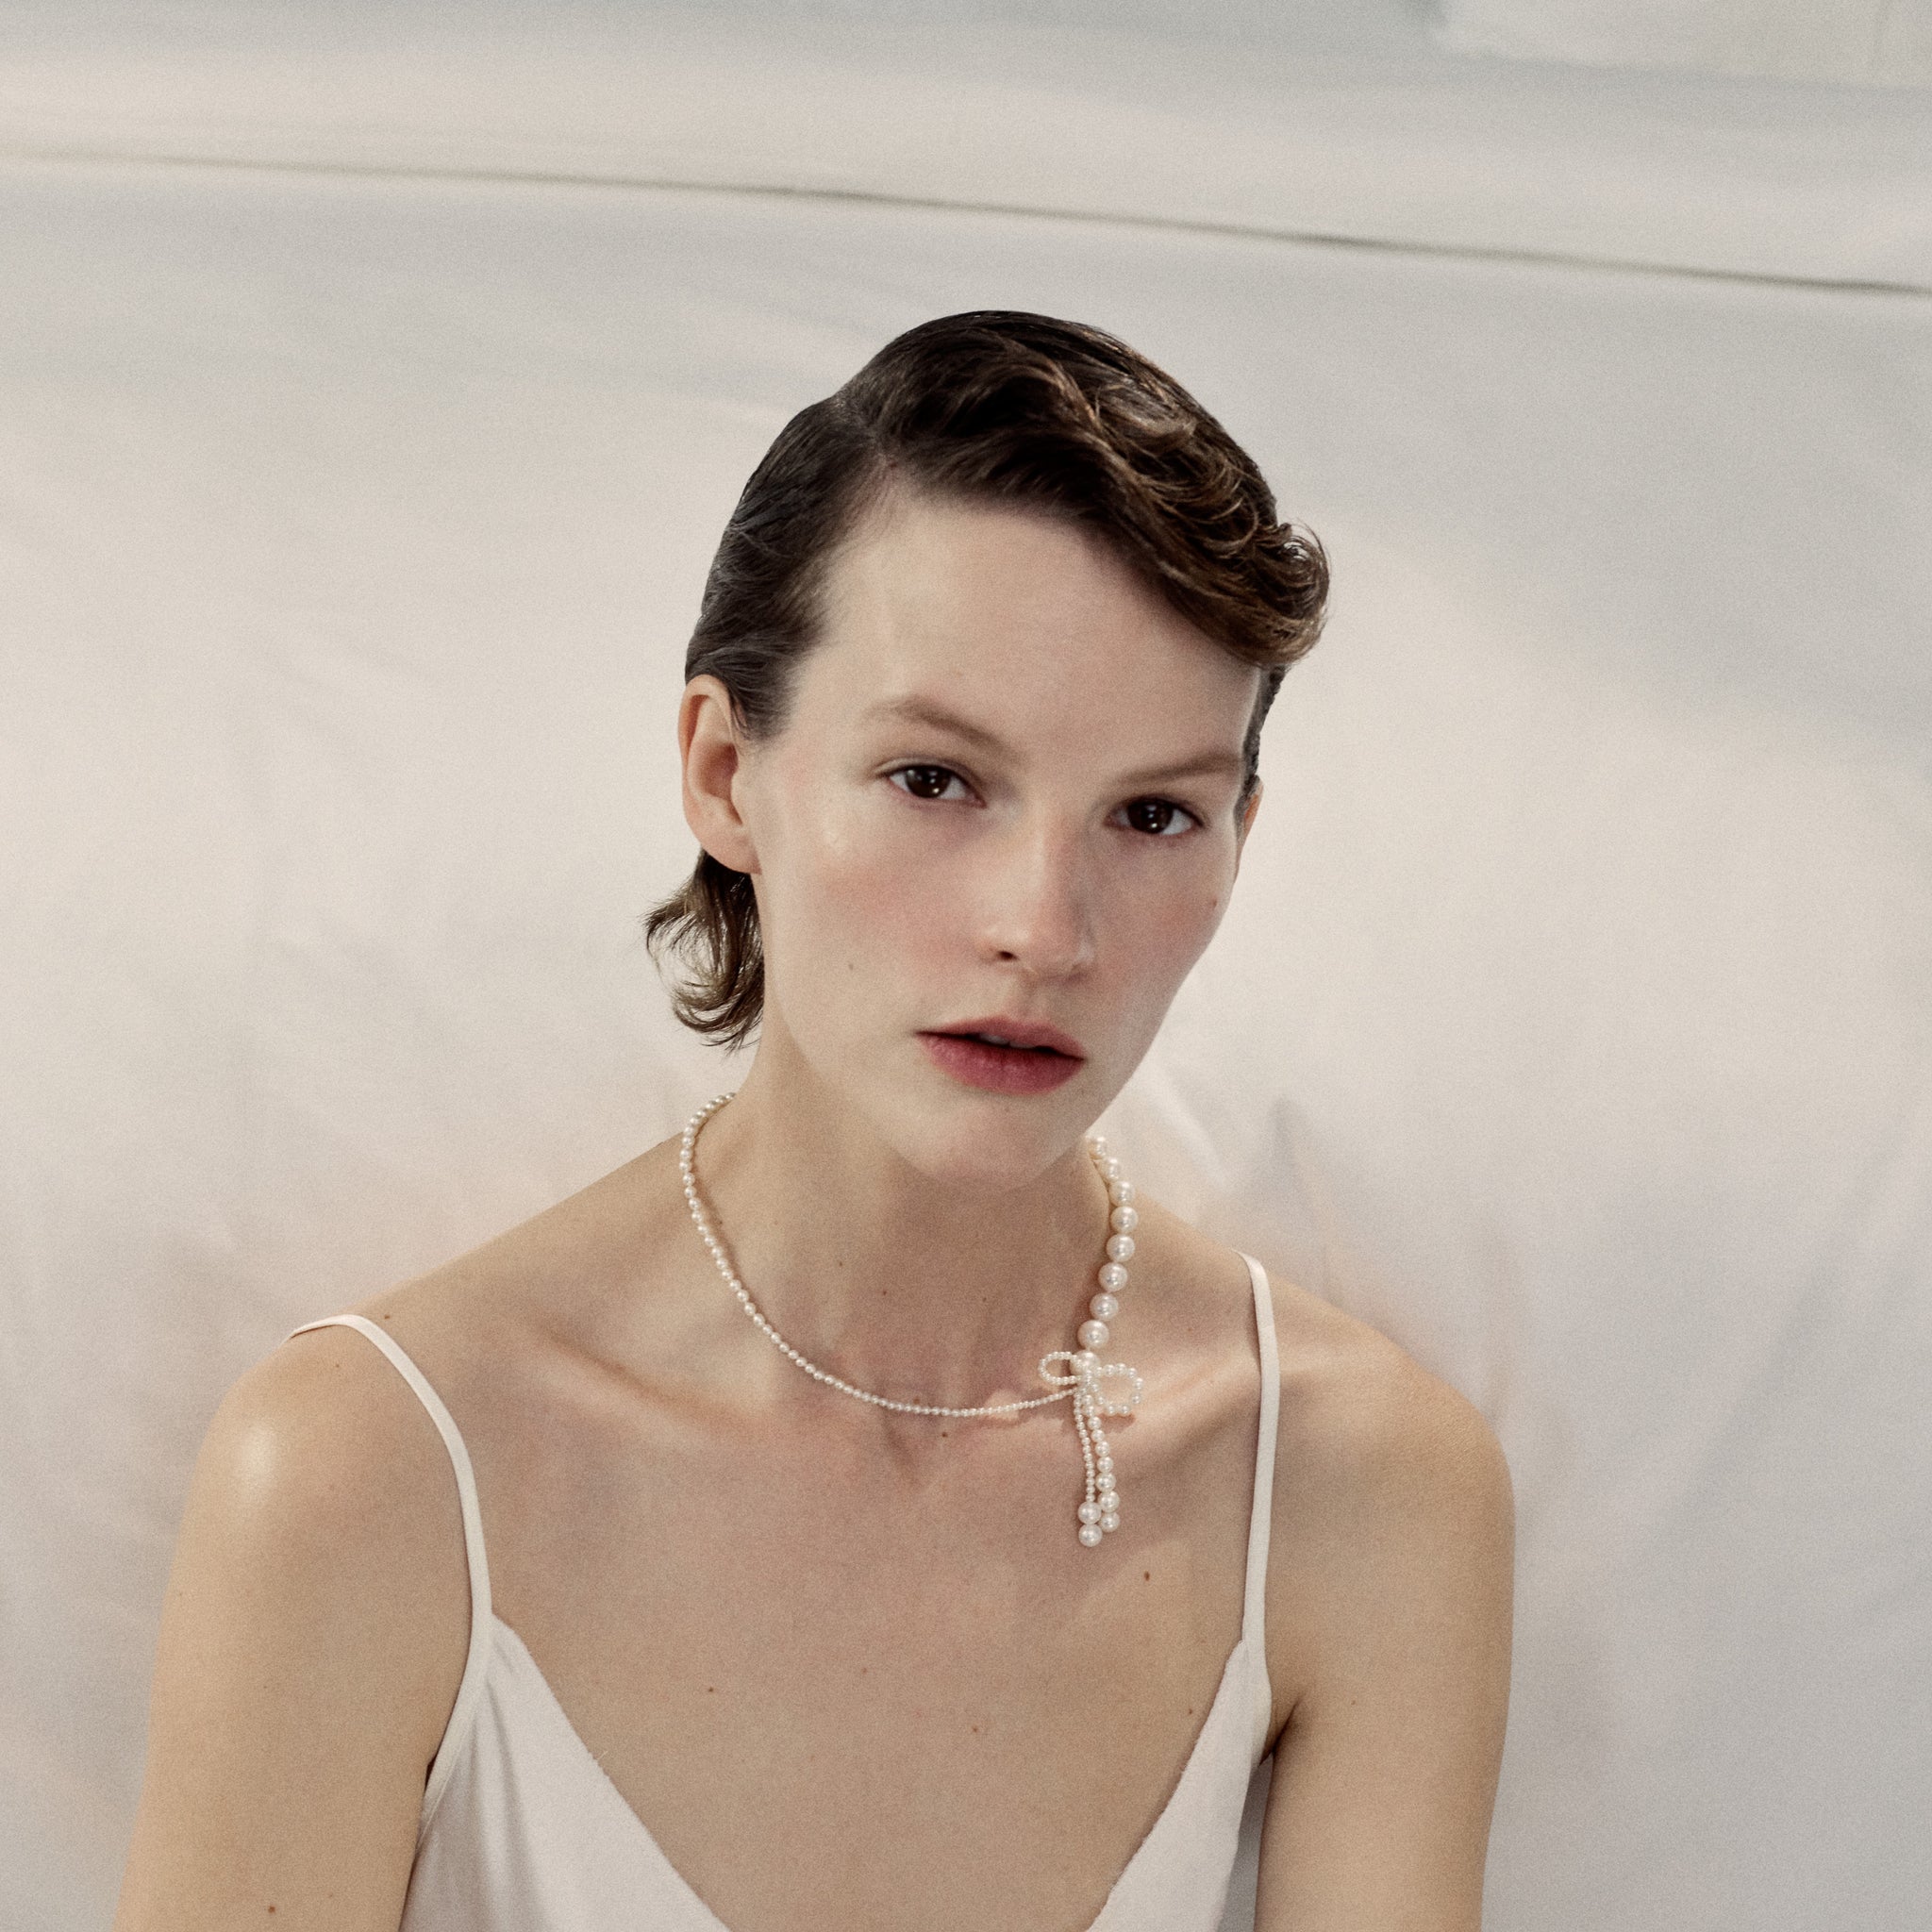 Model wearing Peggy Rosette necklace from the Autumn & Winter 2022 collection; The Bow.